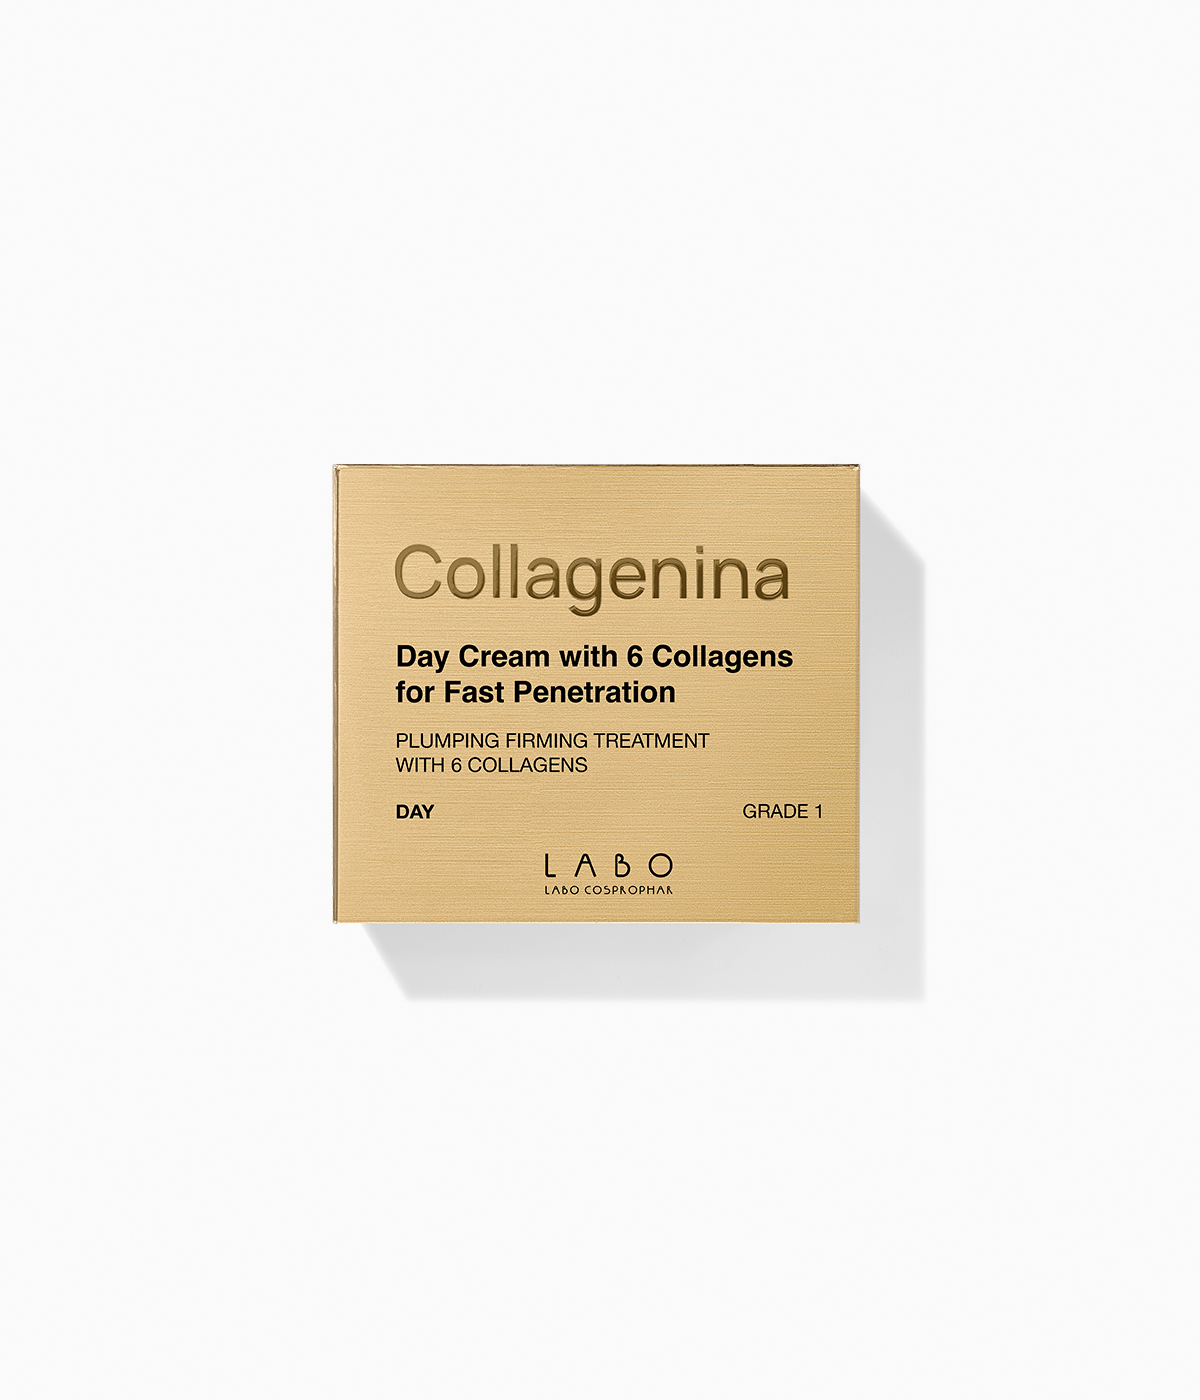 Collagenina Day Cream with 6 Collagens for Fast Penetration